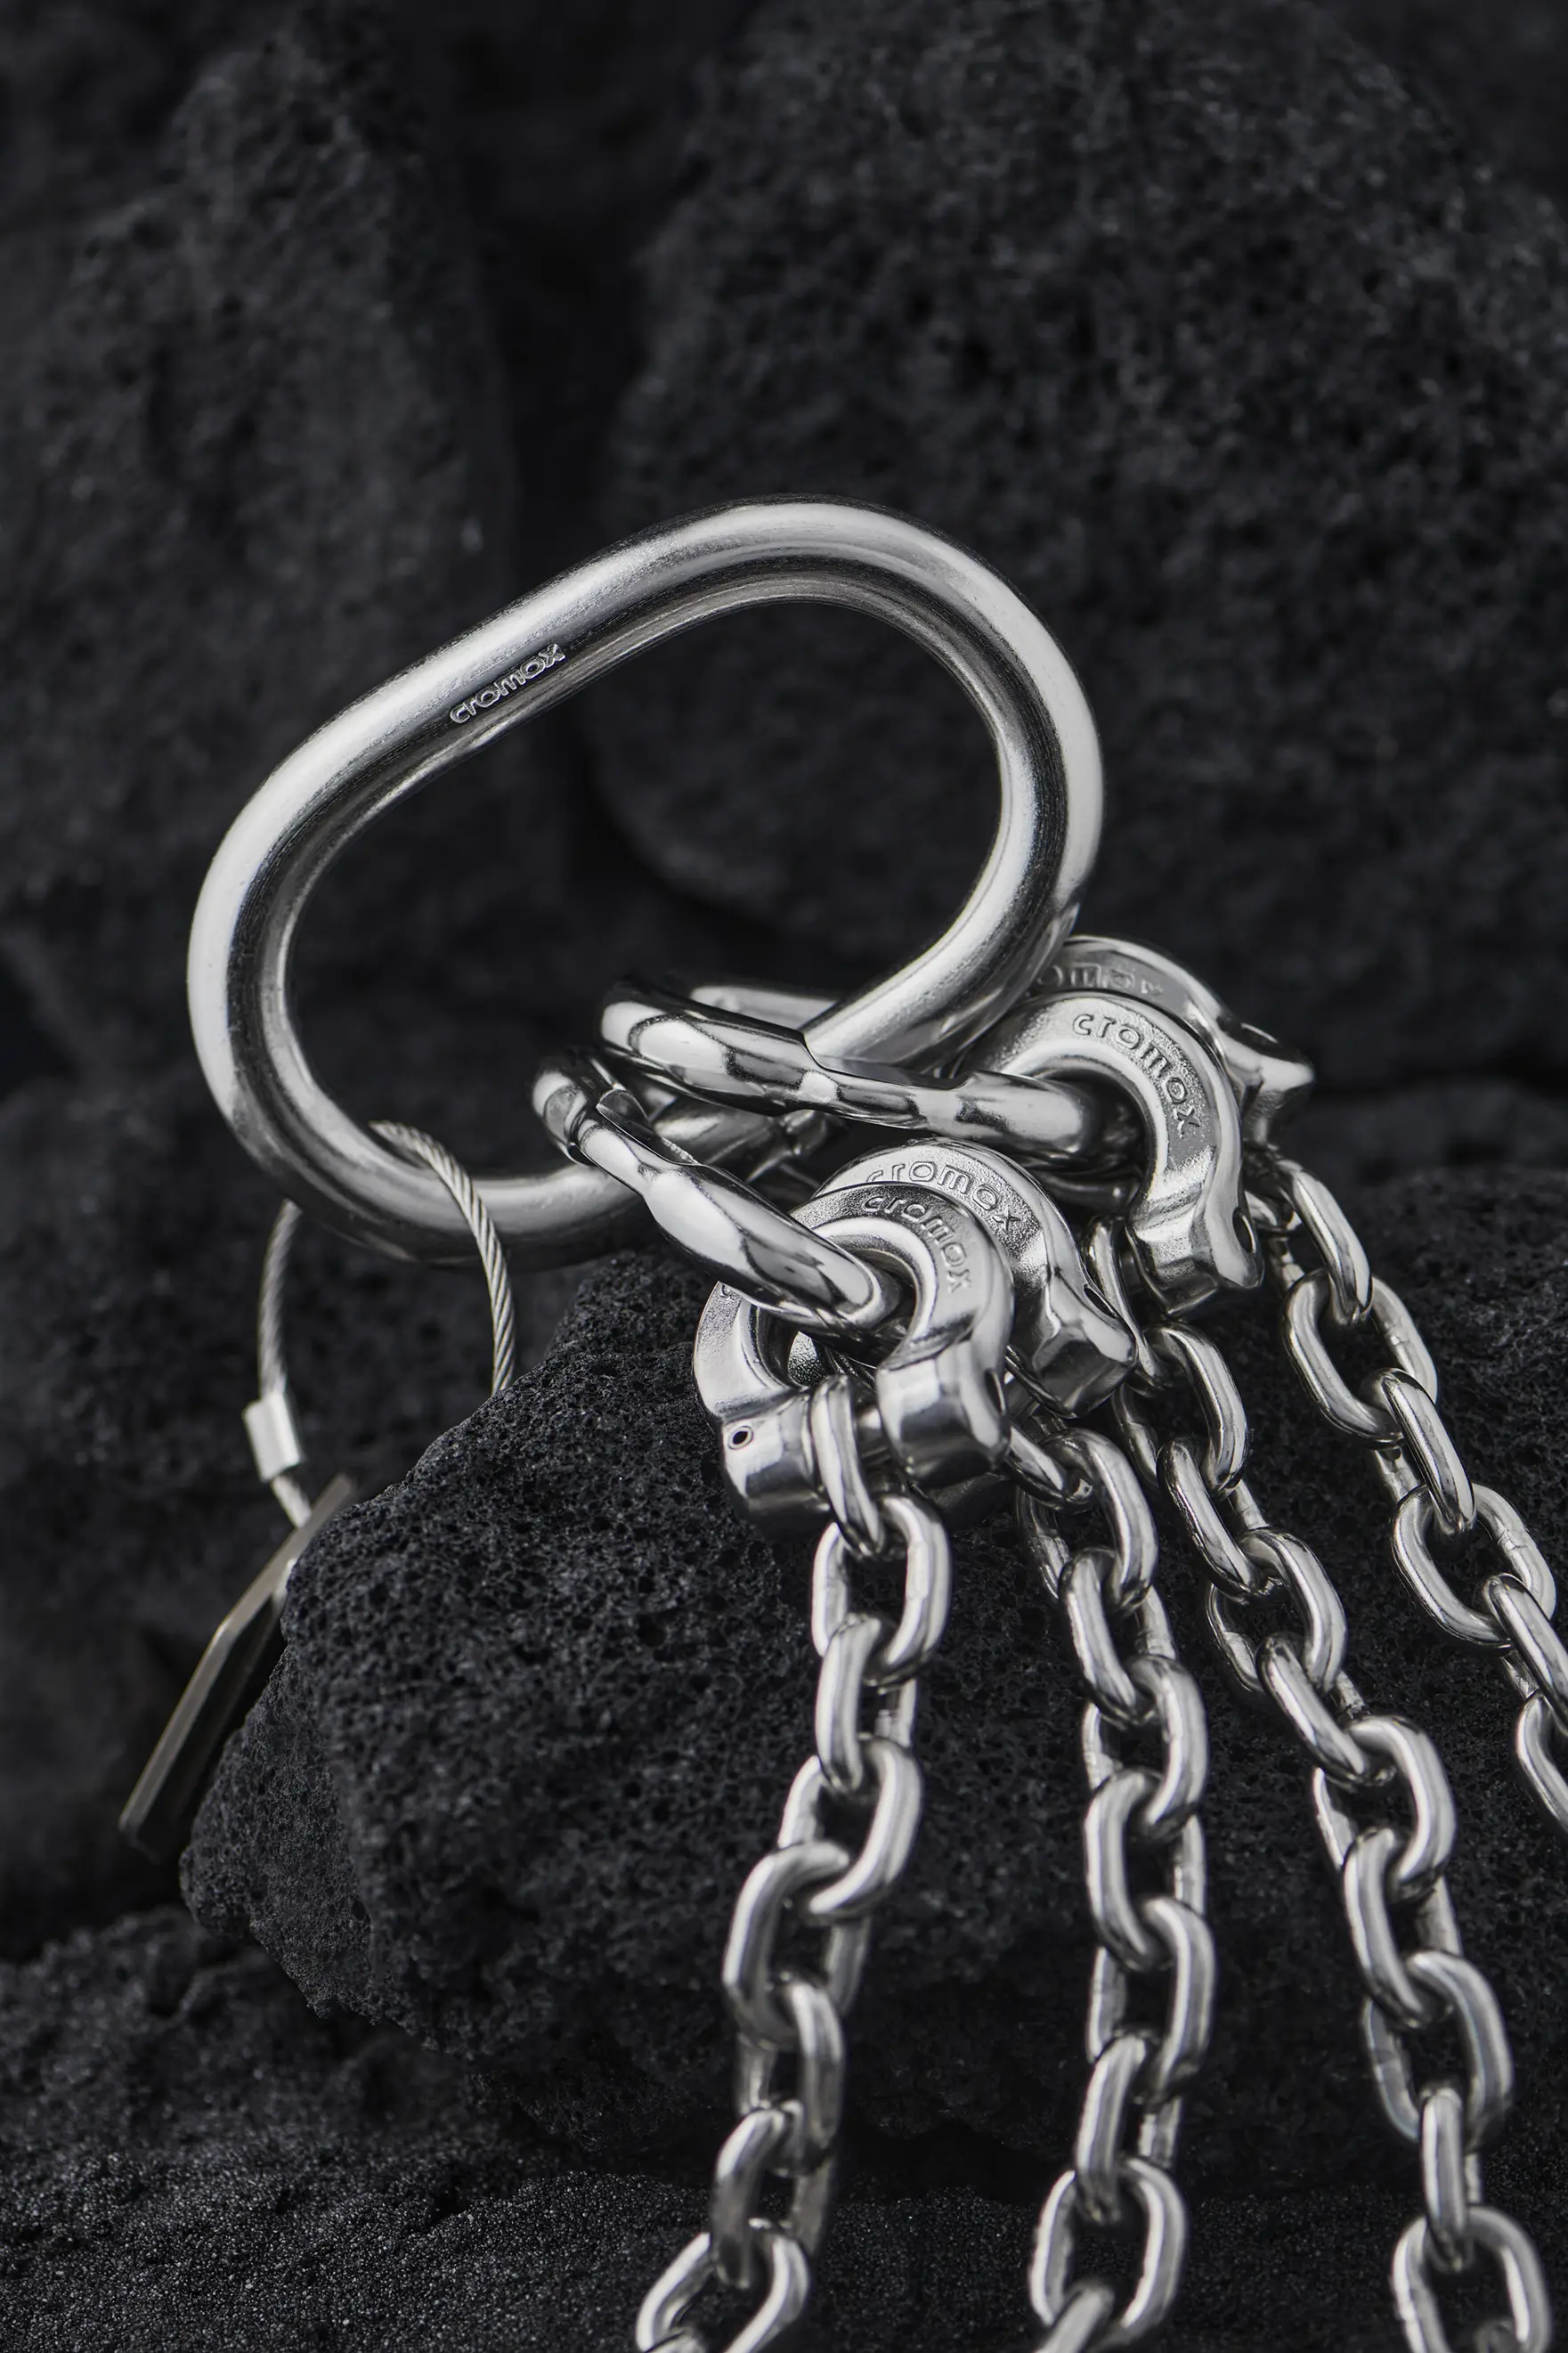 Stainless steel sling chain from cromox® with standard clevis shackle attachment